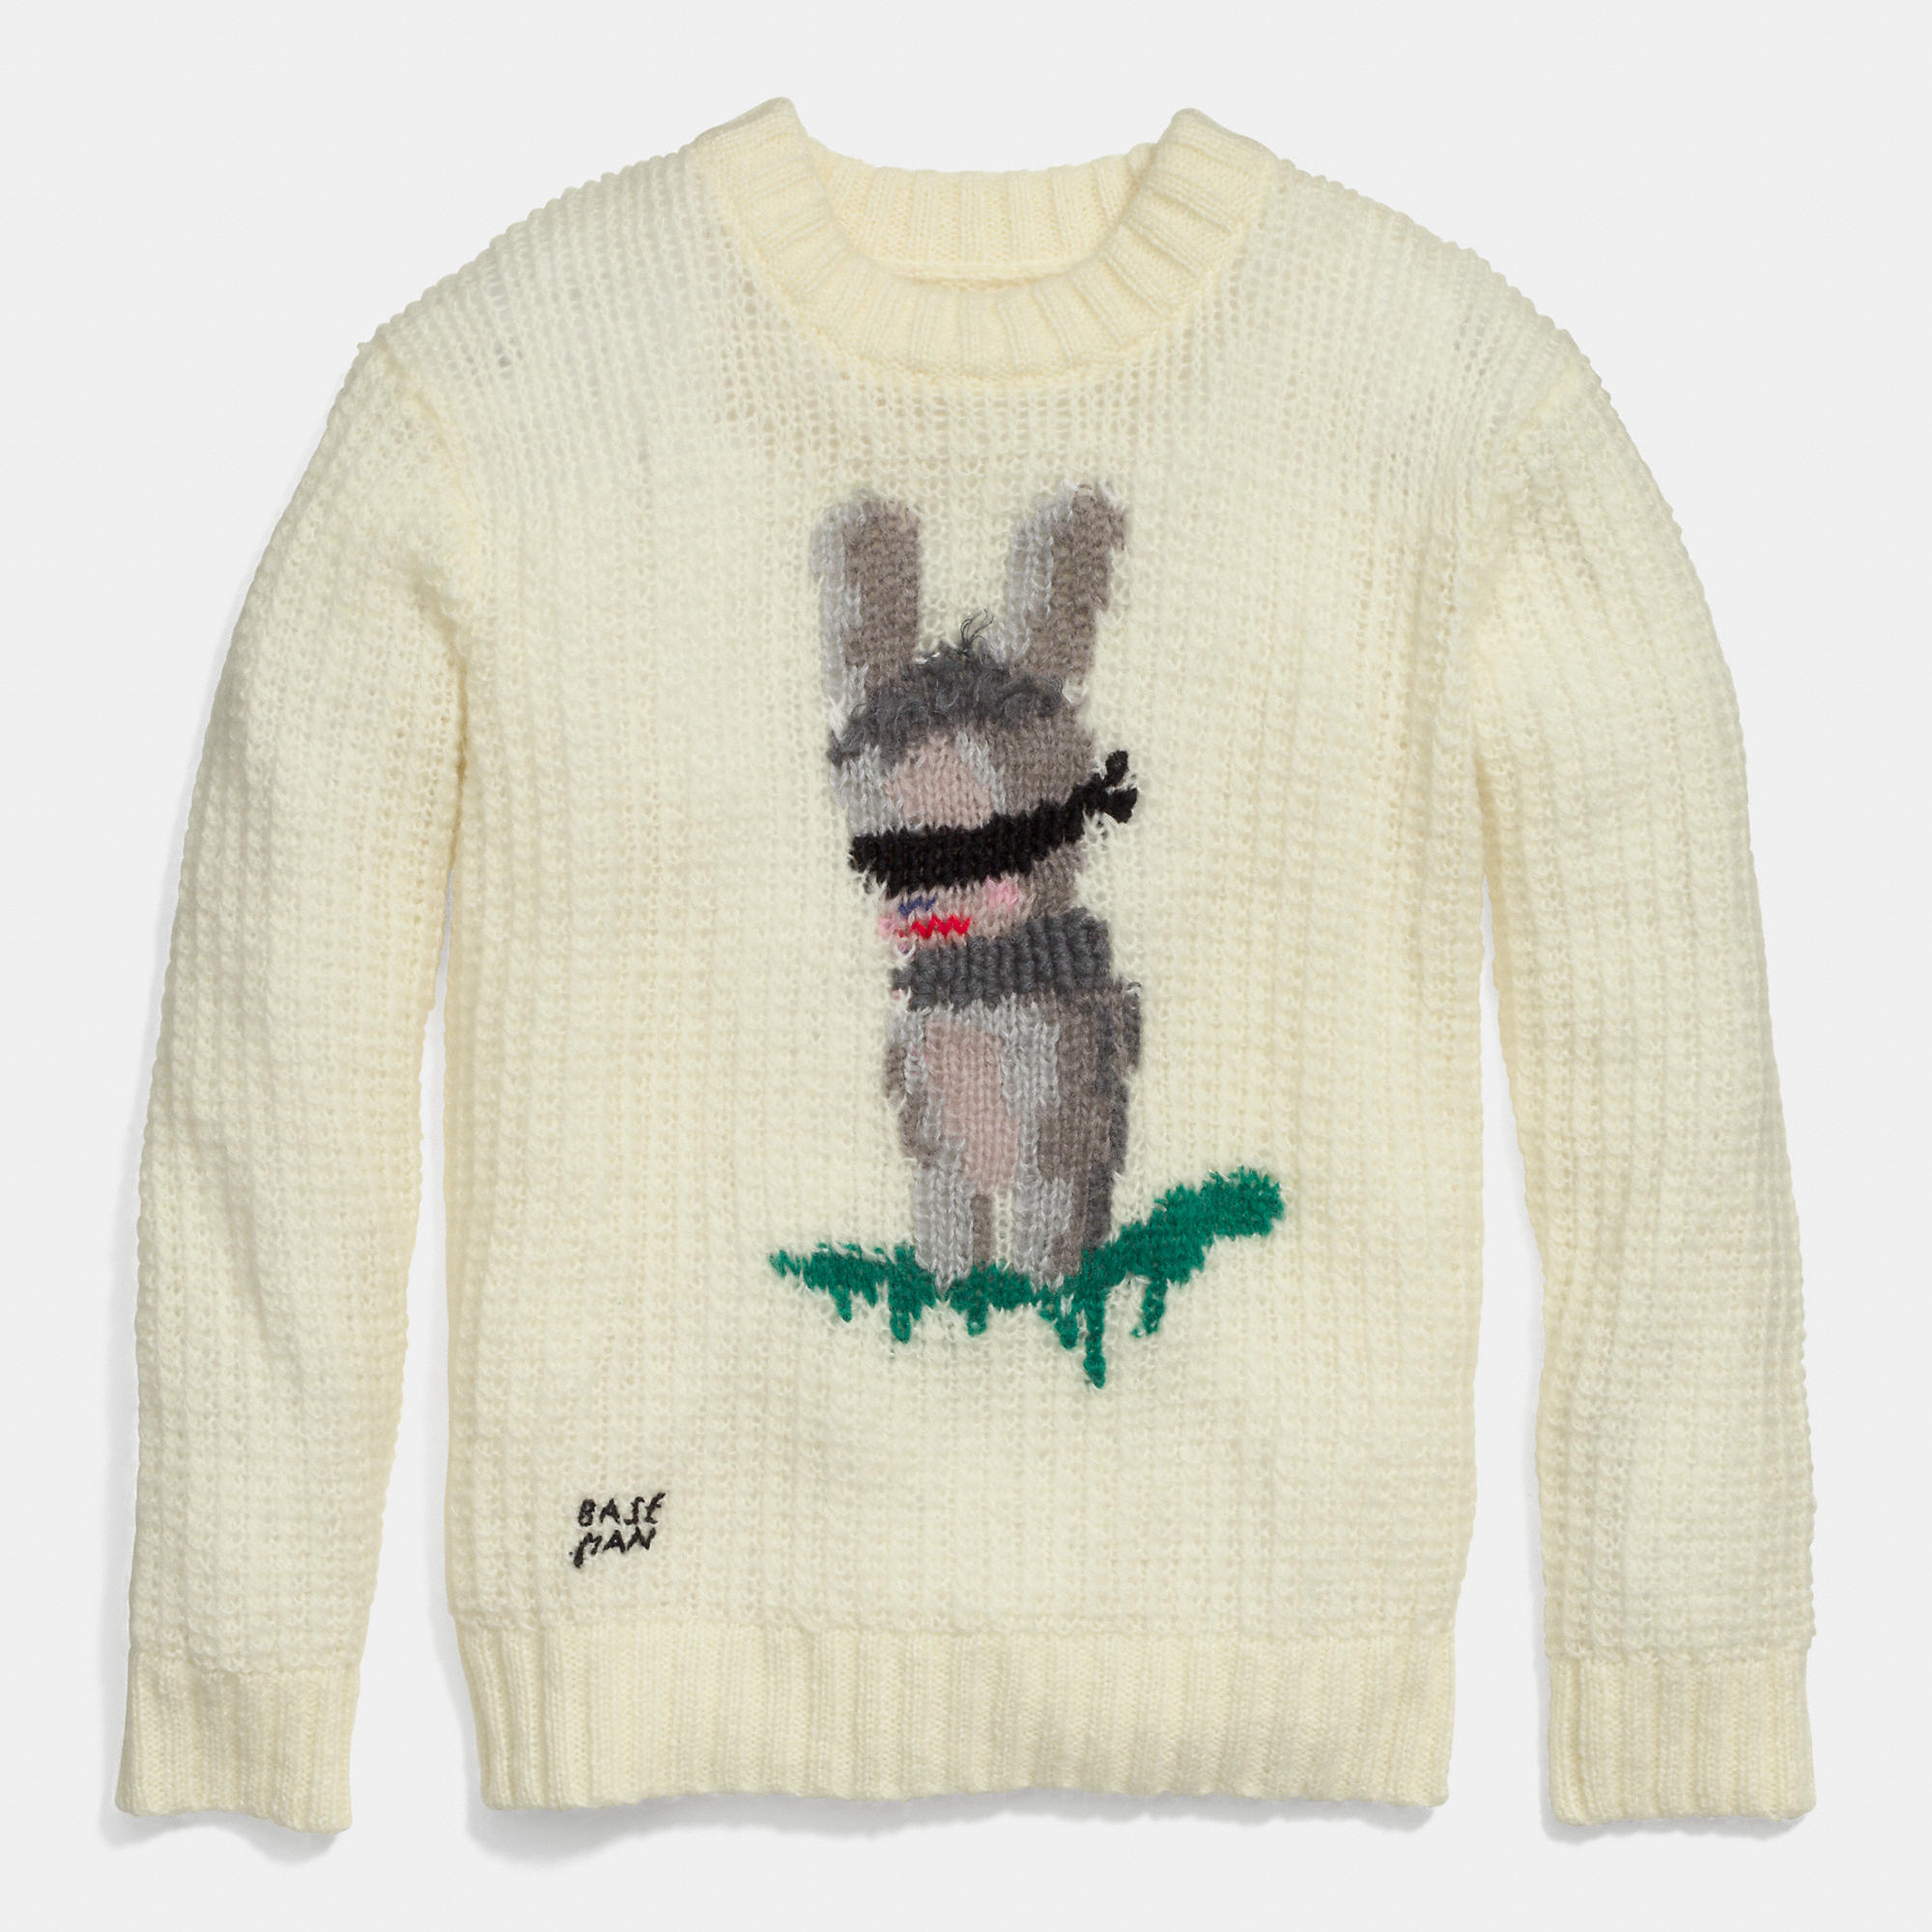 Lyst - Coach X Baseman Emmanuel Hare Ray Sweater in Natural for Men